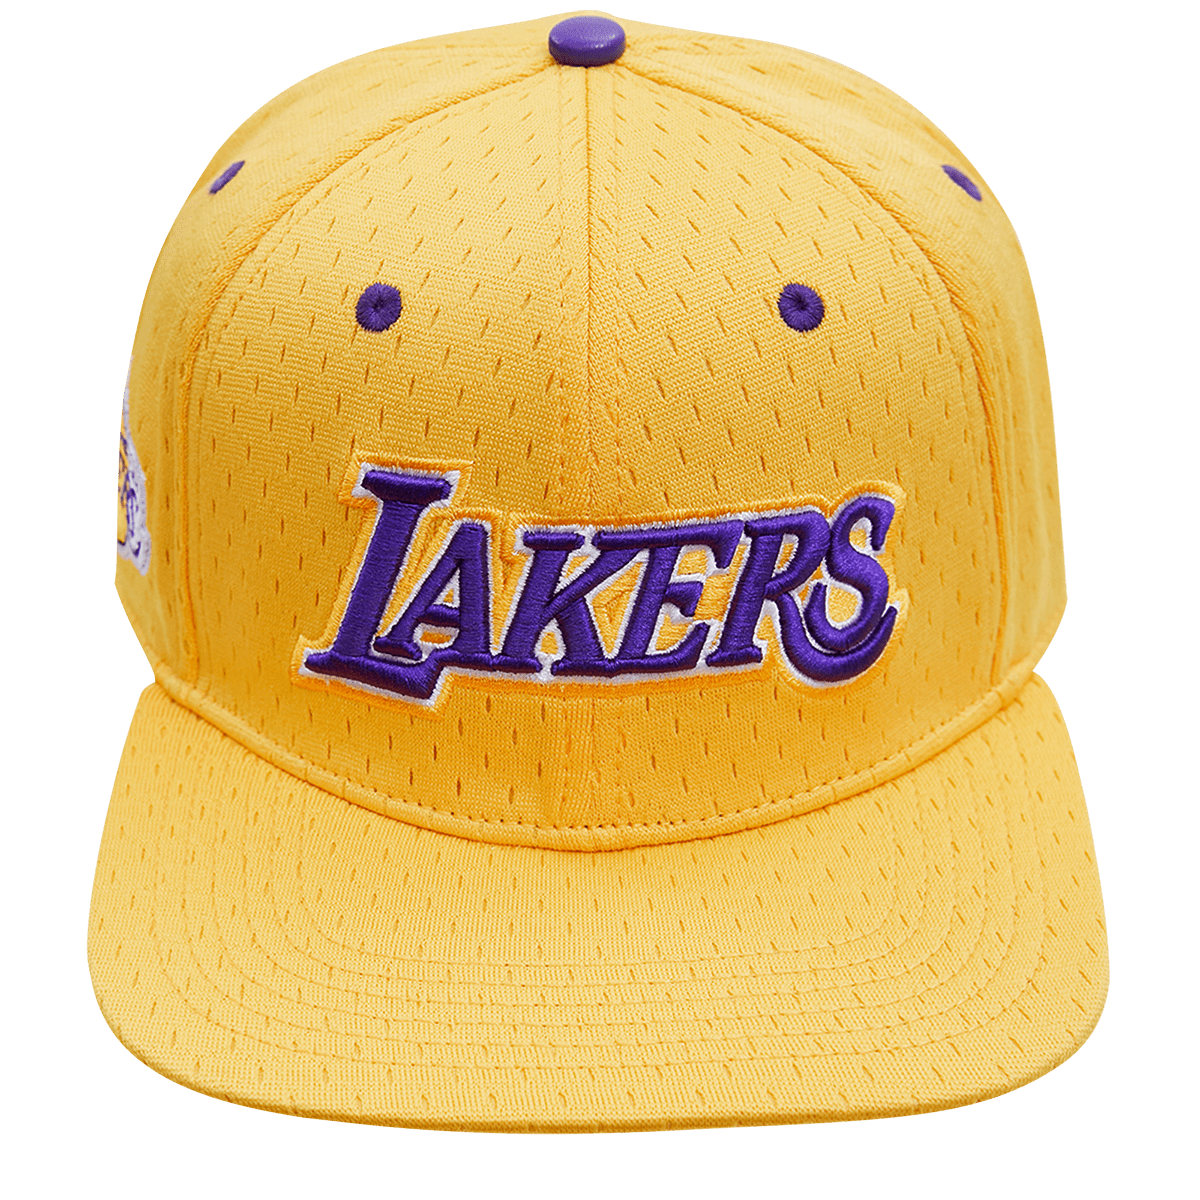 LOS ANGELES CLIPPERS STACKED LOGO SNAPBACK HAT (ROYAL BLUE) – Pro Standard